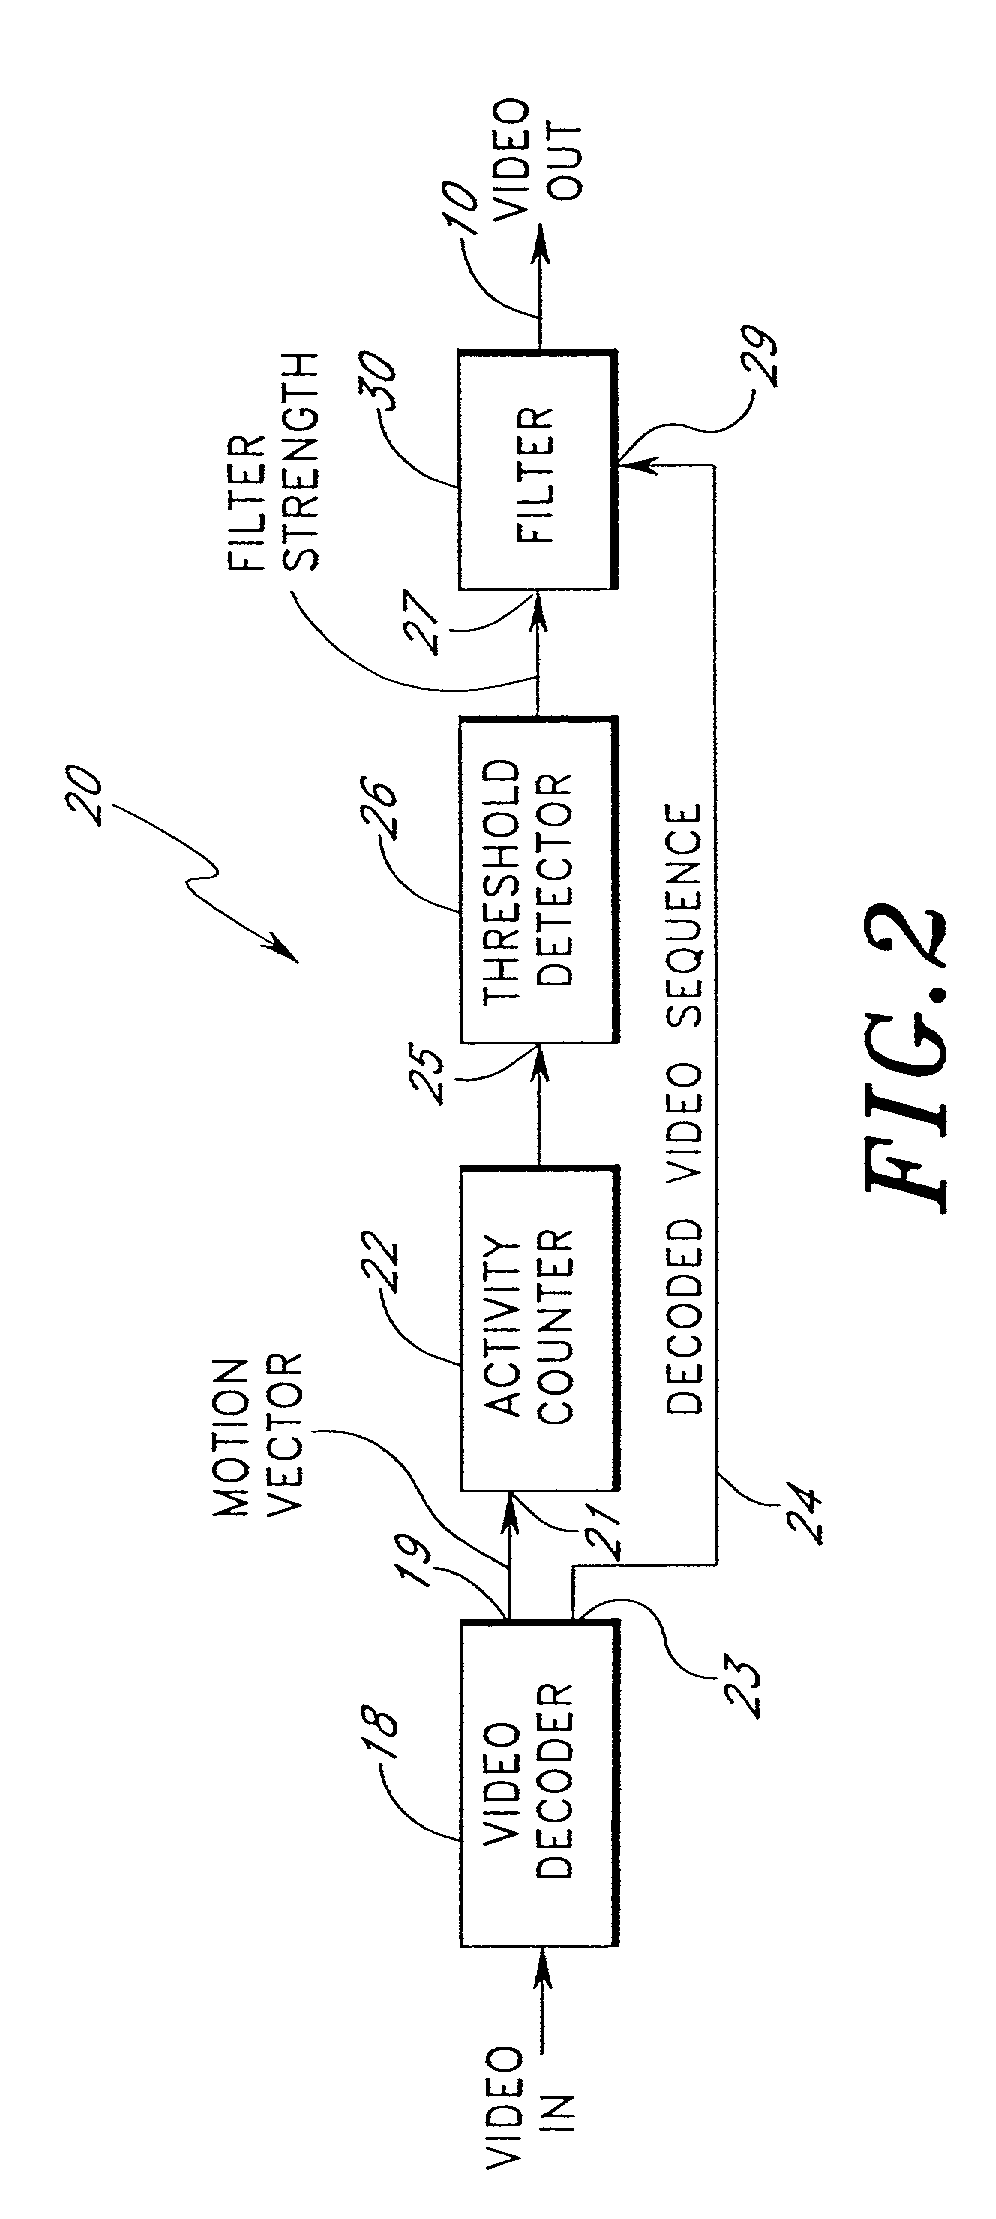 Video compression and decompression system with postfilter to filter coding artifacts